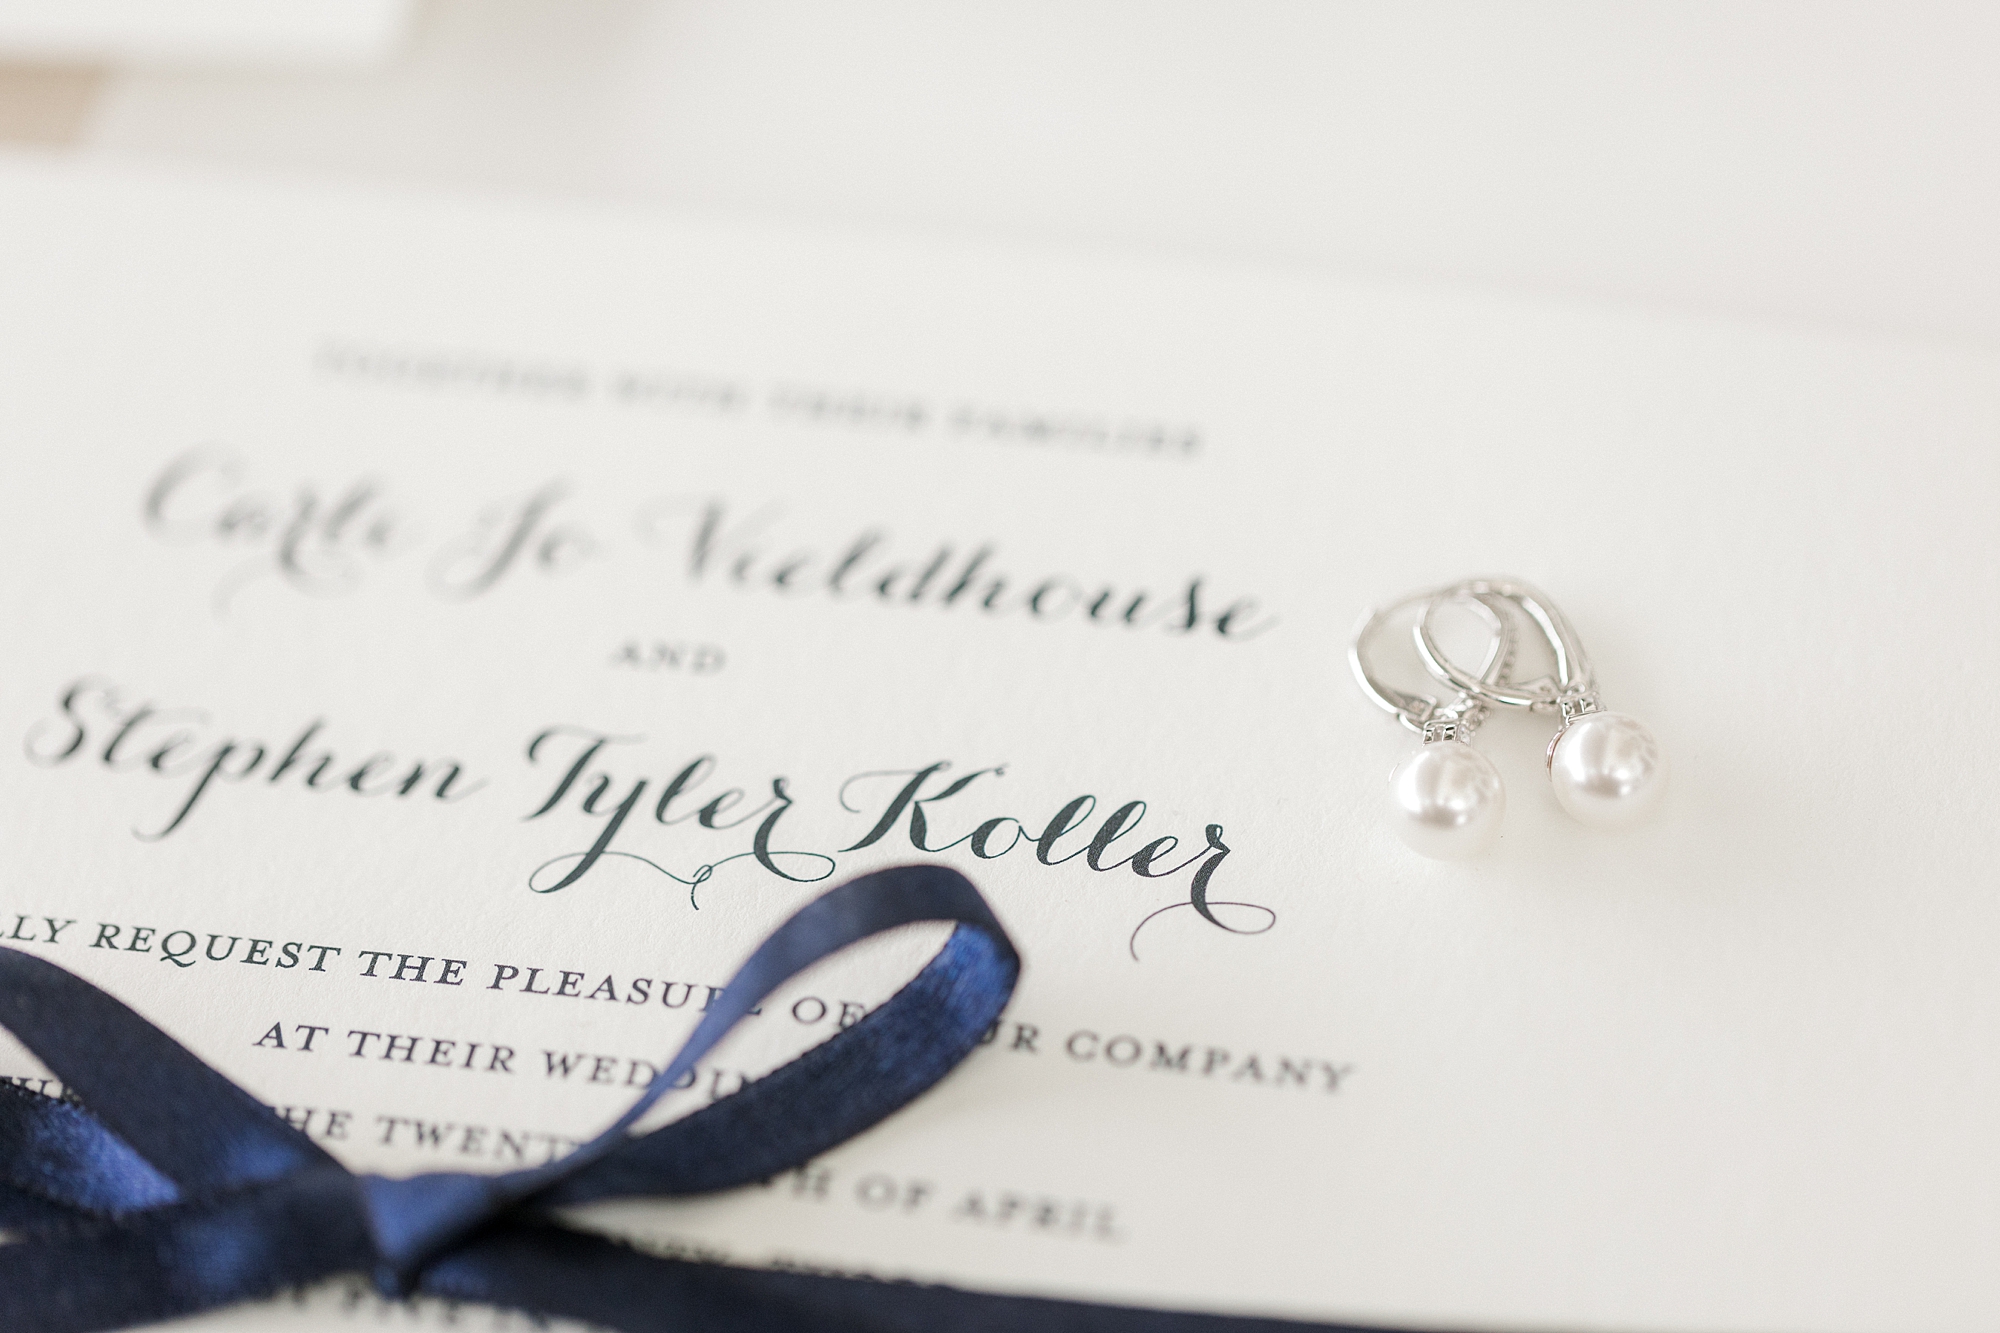 stationery with blue calligraphy, blue ribbon and diamond earrings resting on top